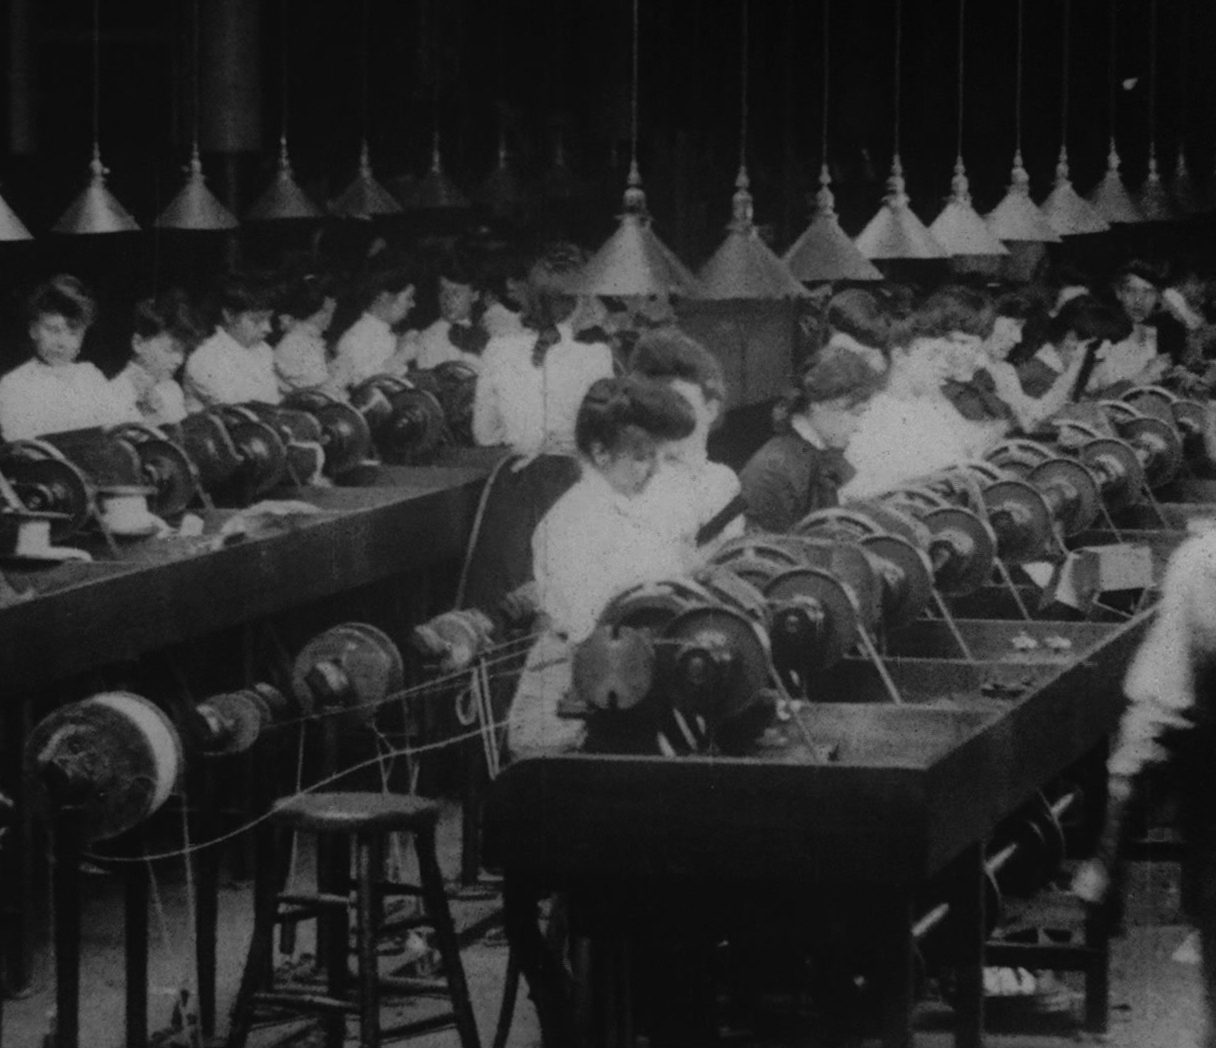 https://the-public-domain-review.imgix.net/collections/the-westinghouse-works-1904/westinghouse-thumb.jpeg